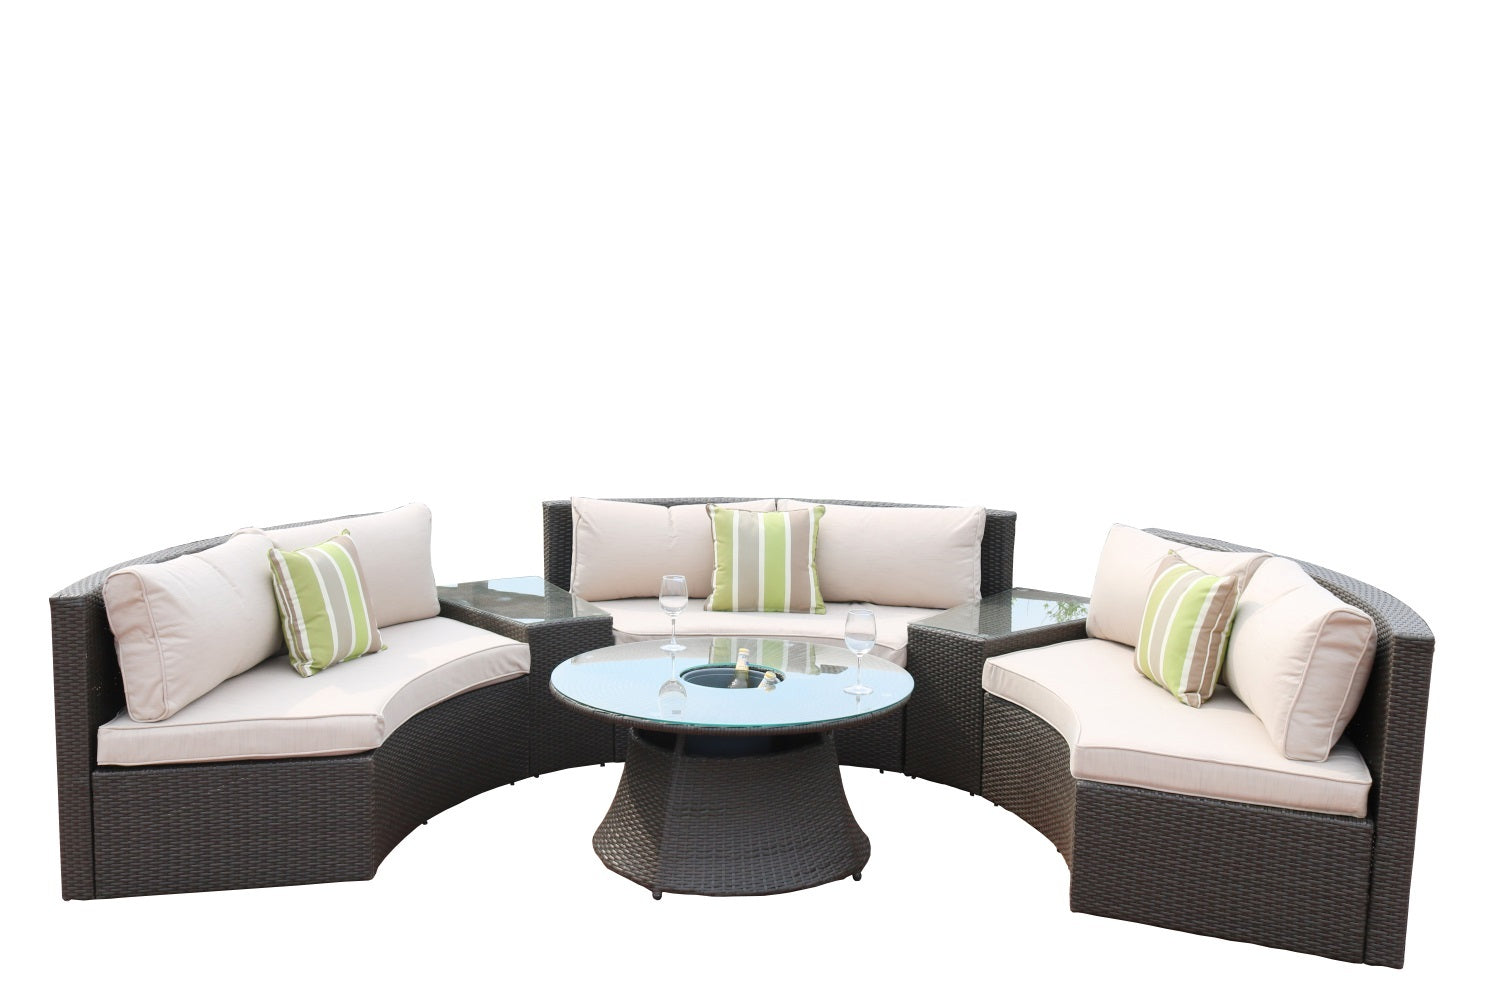 Abrihome Jessica 6 Piece Rattan Sectional Set with Cushions